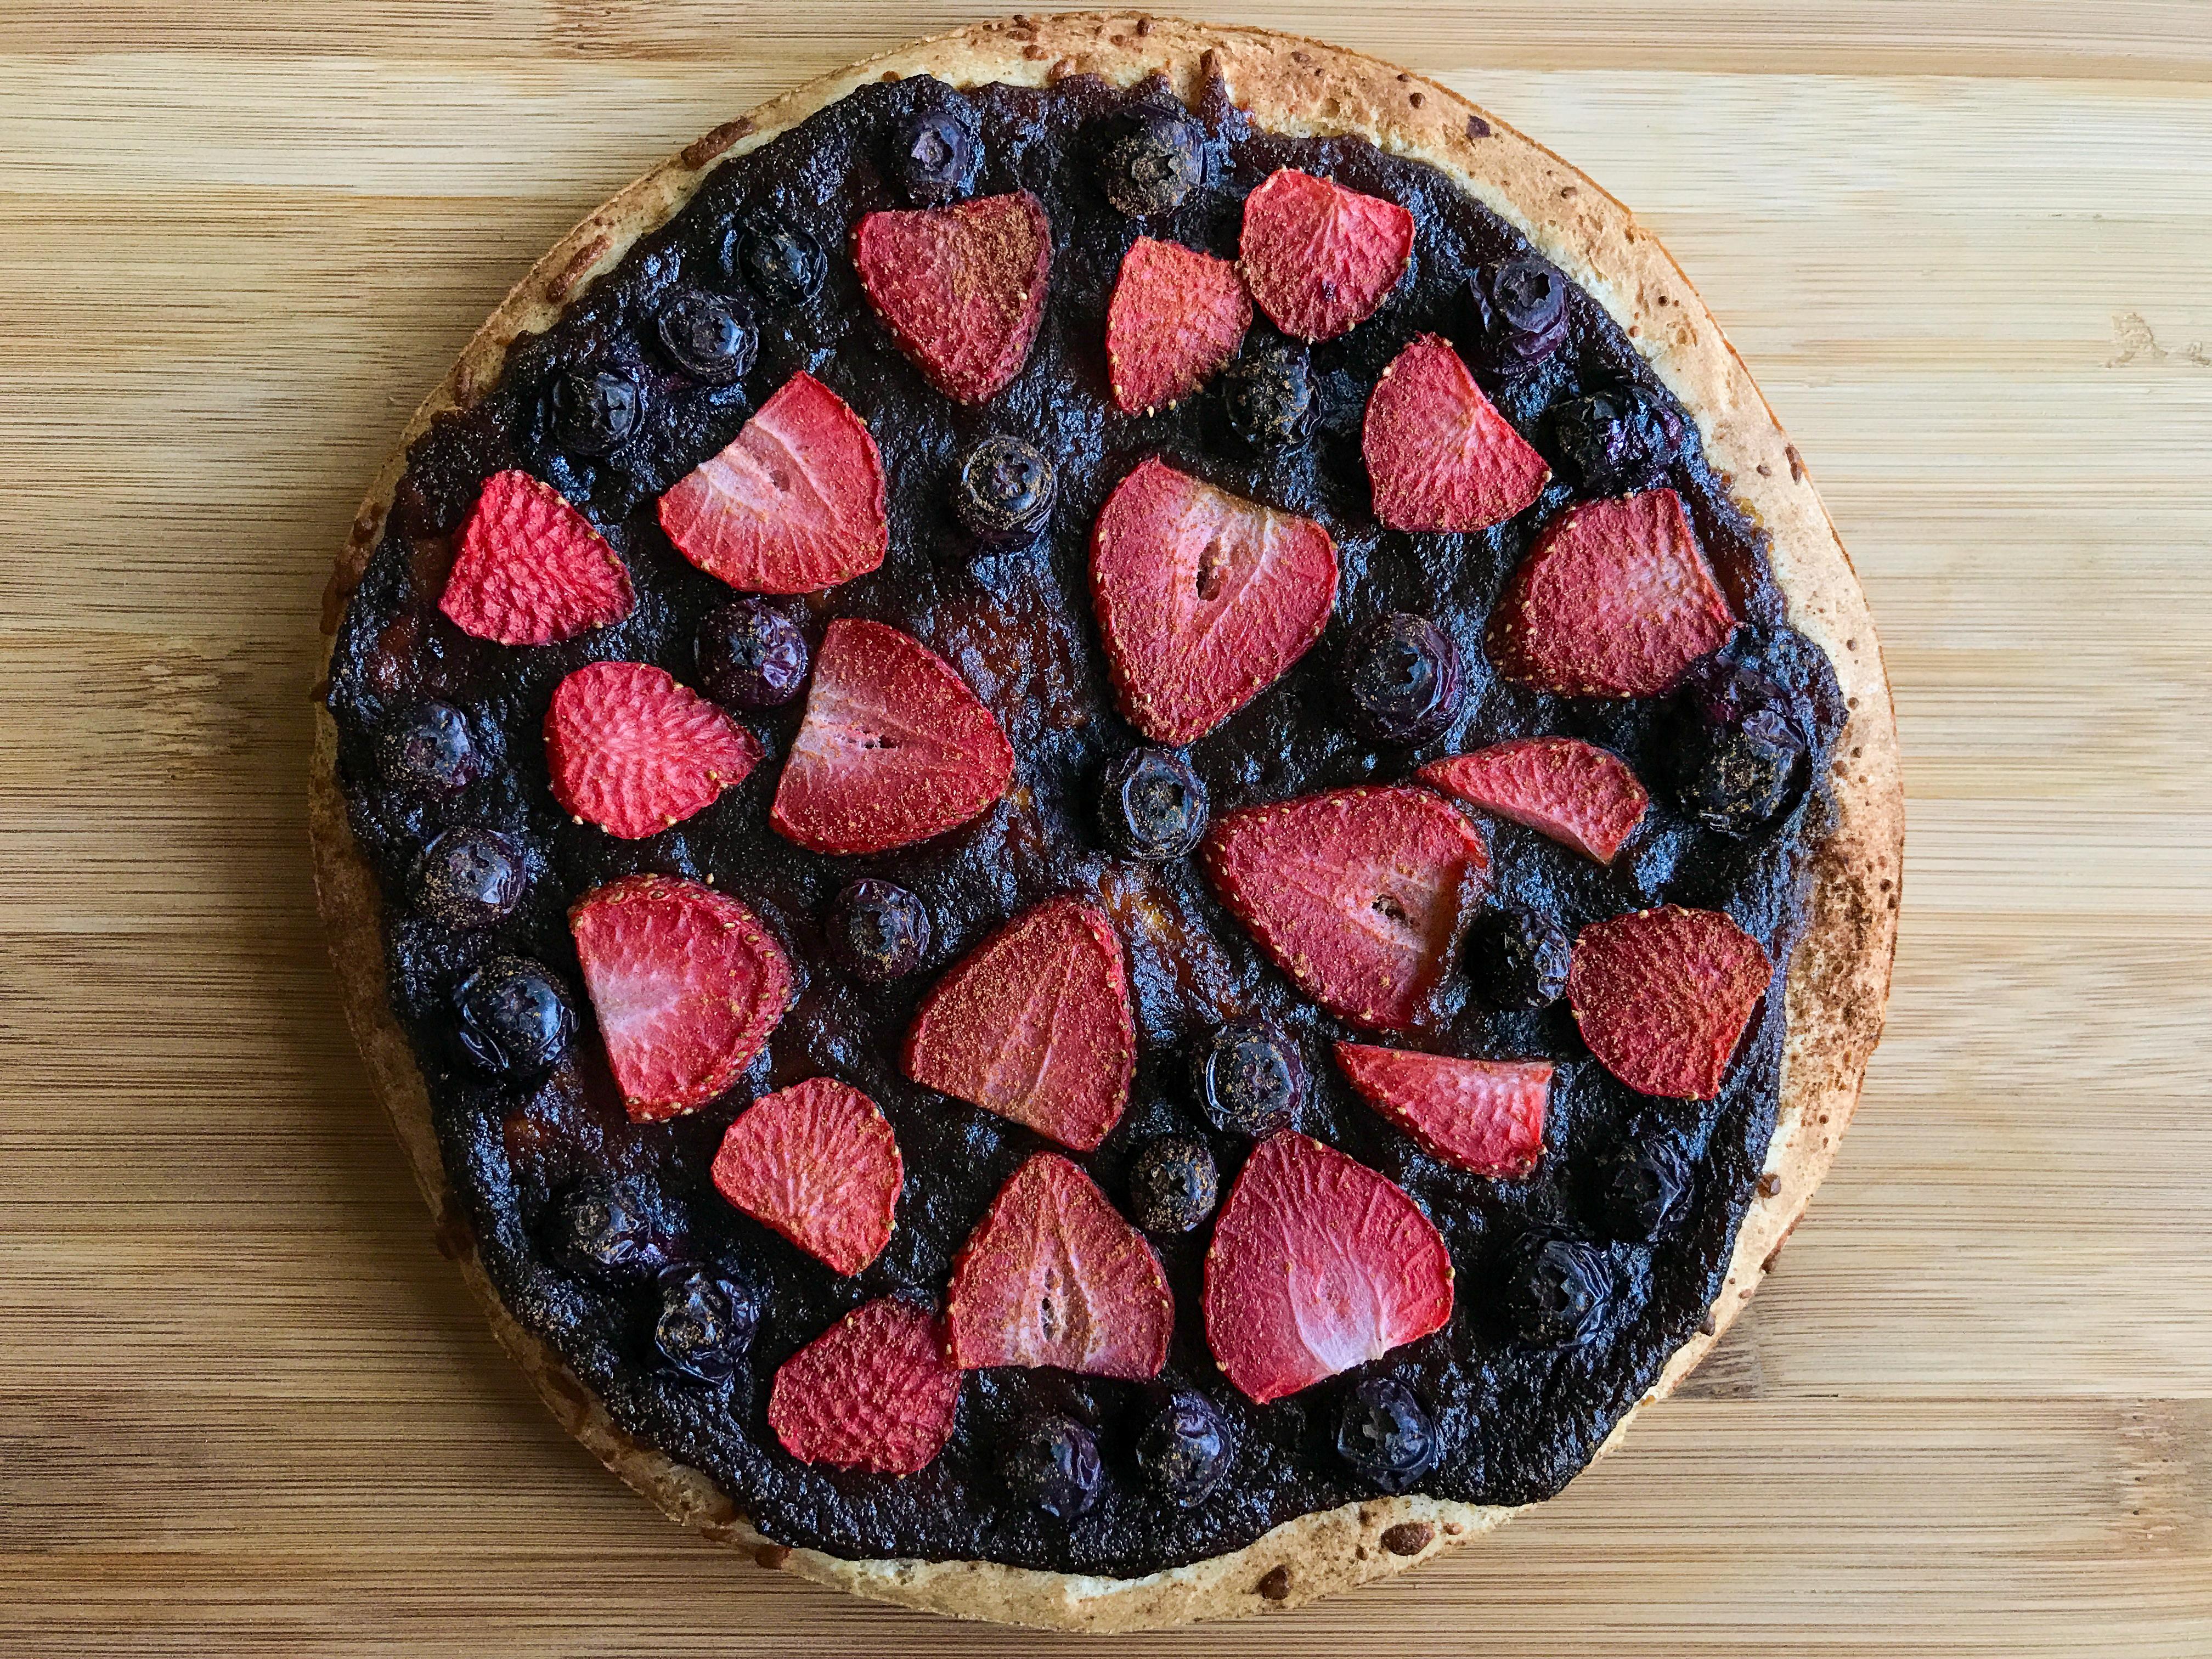 Strawberries and blueberries in a circle shaped like a pizza.